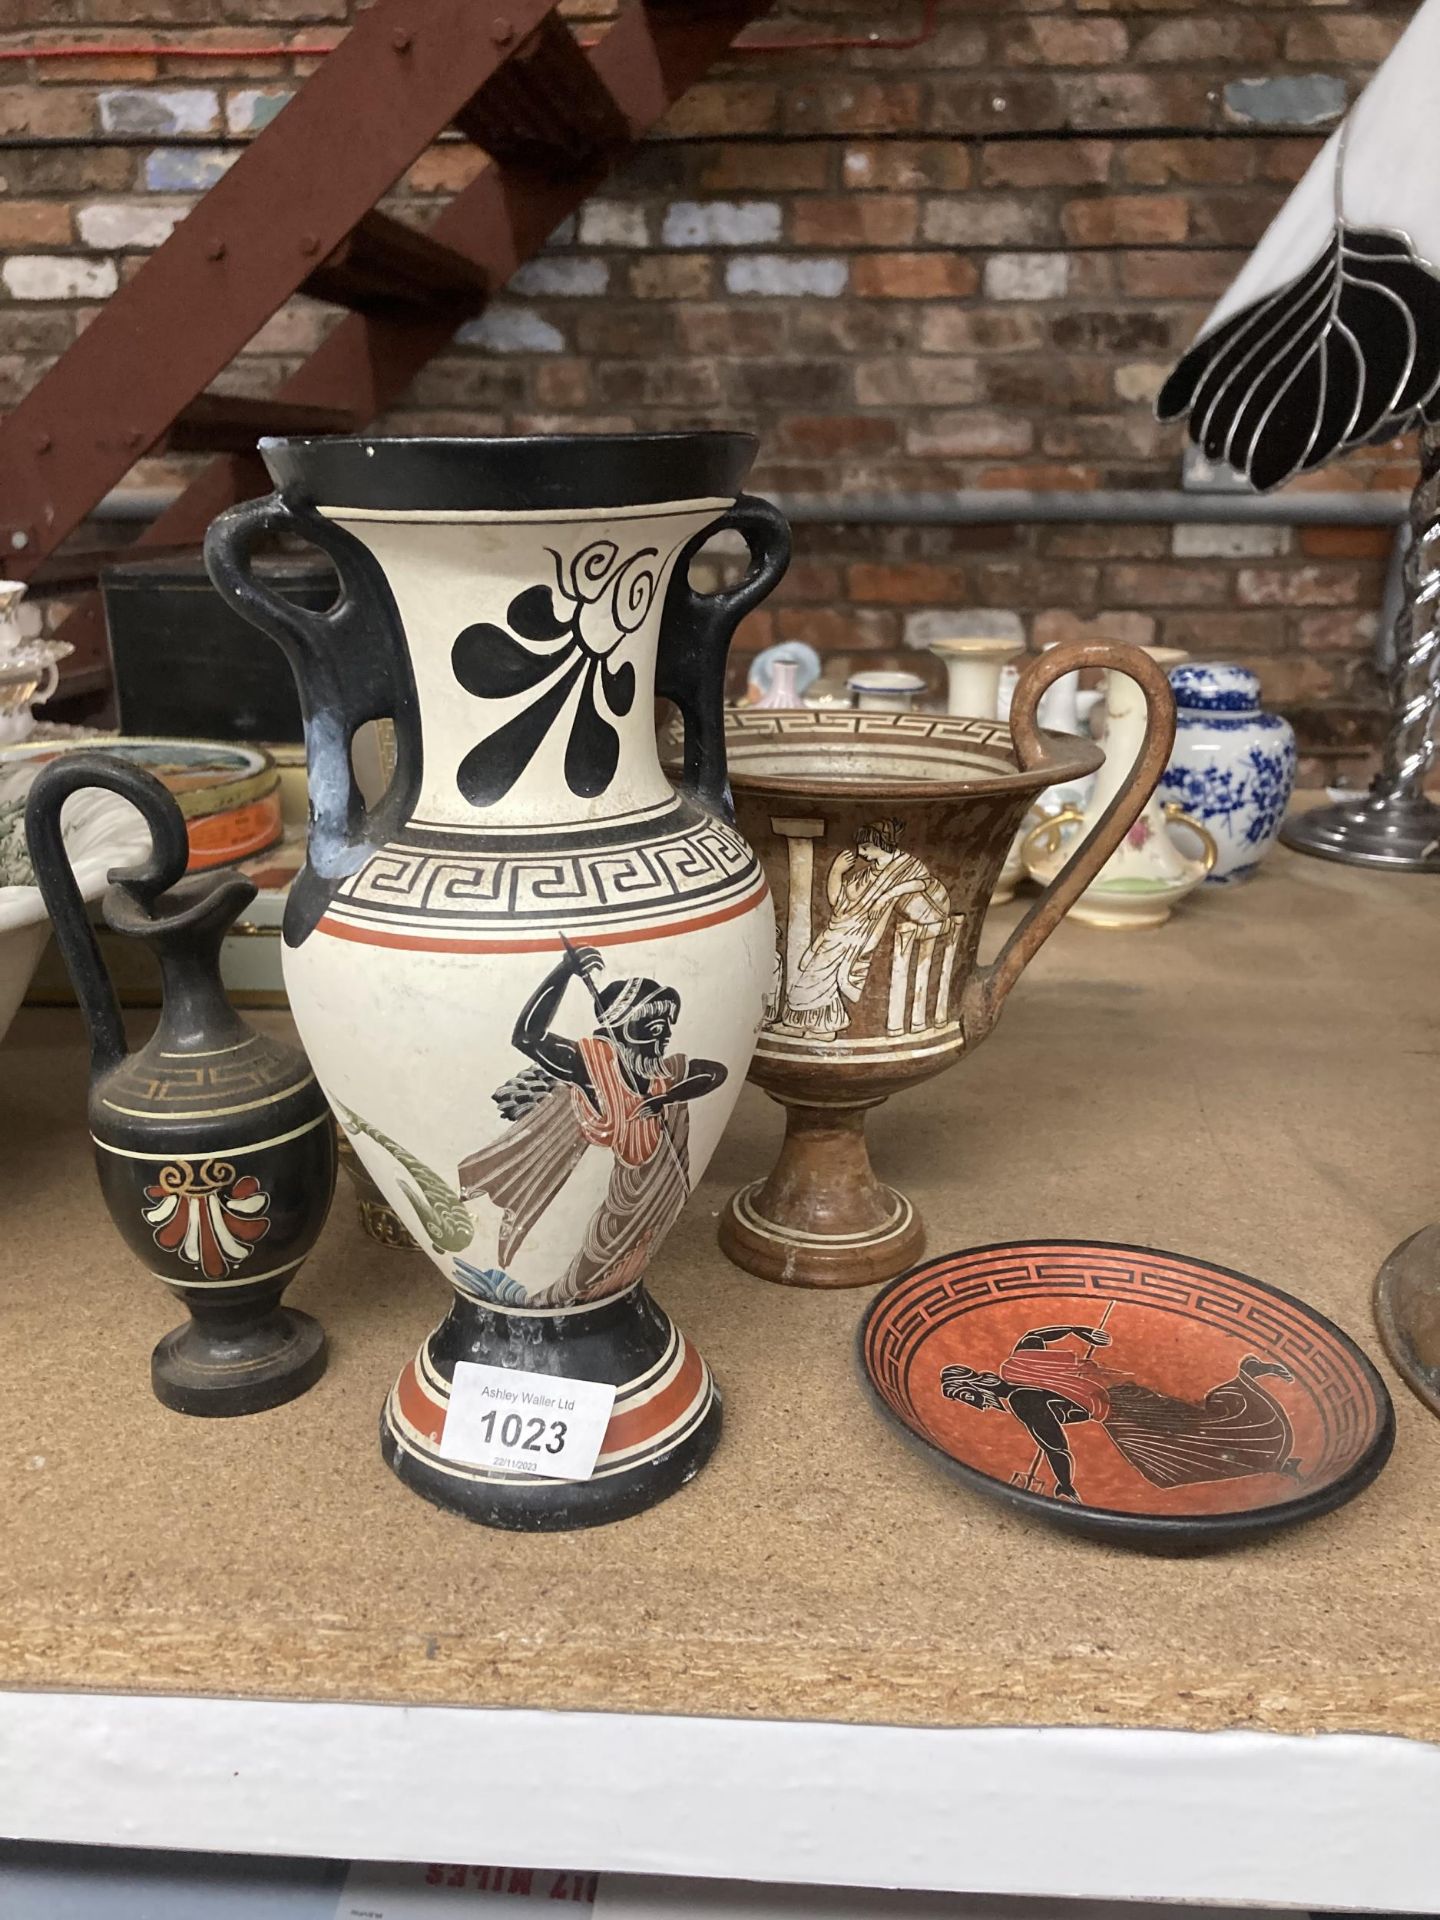 A COLLECTION OF GREEK STYLE ITEMS TO INCLUDE A TWO HANDLED URN, VASES AND A PIN TRAY - 5 IN TOTAL